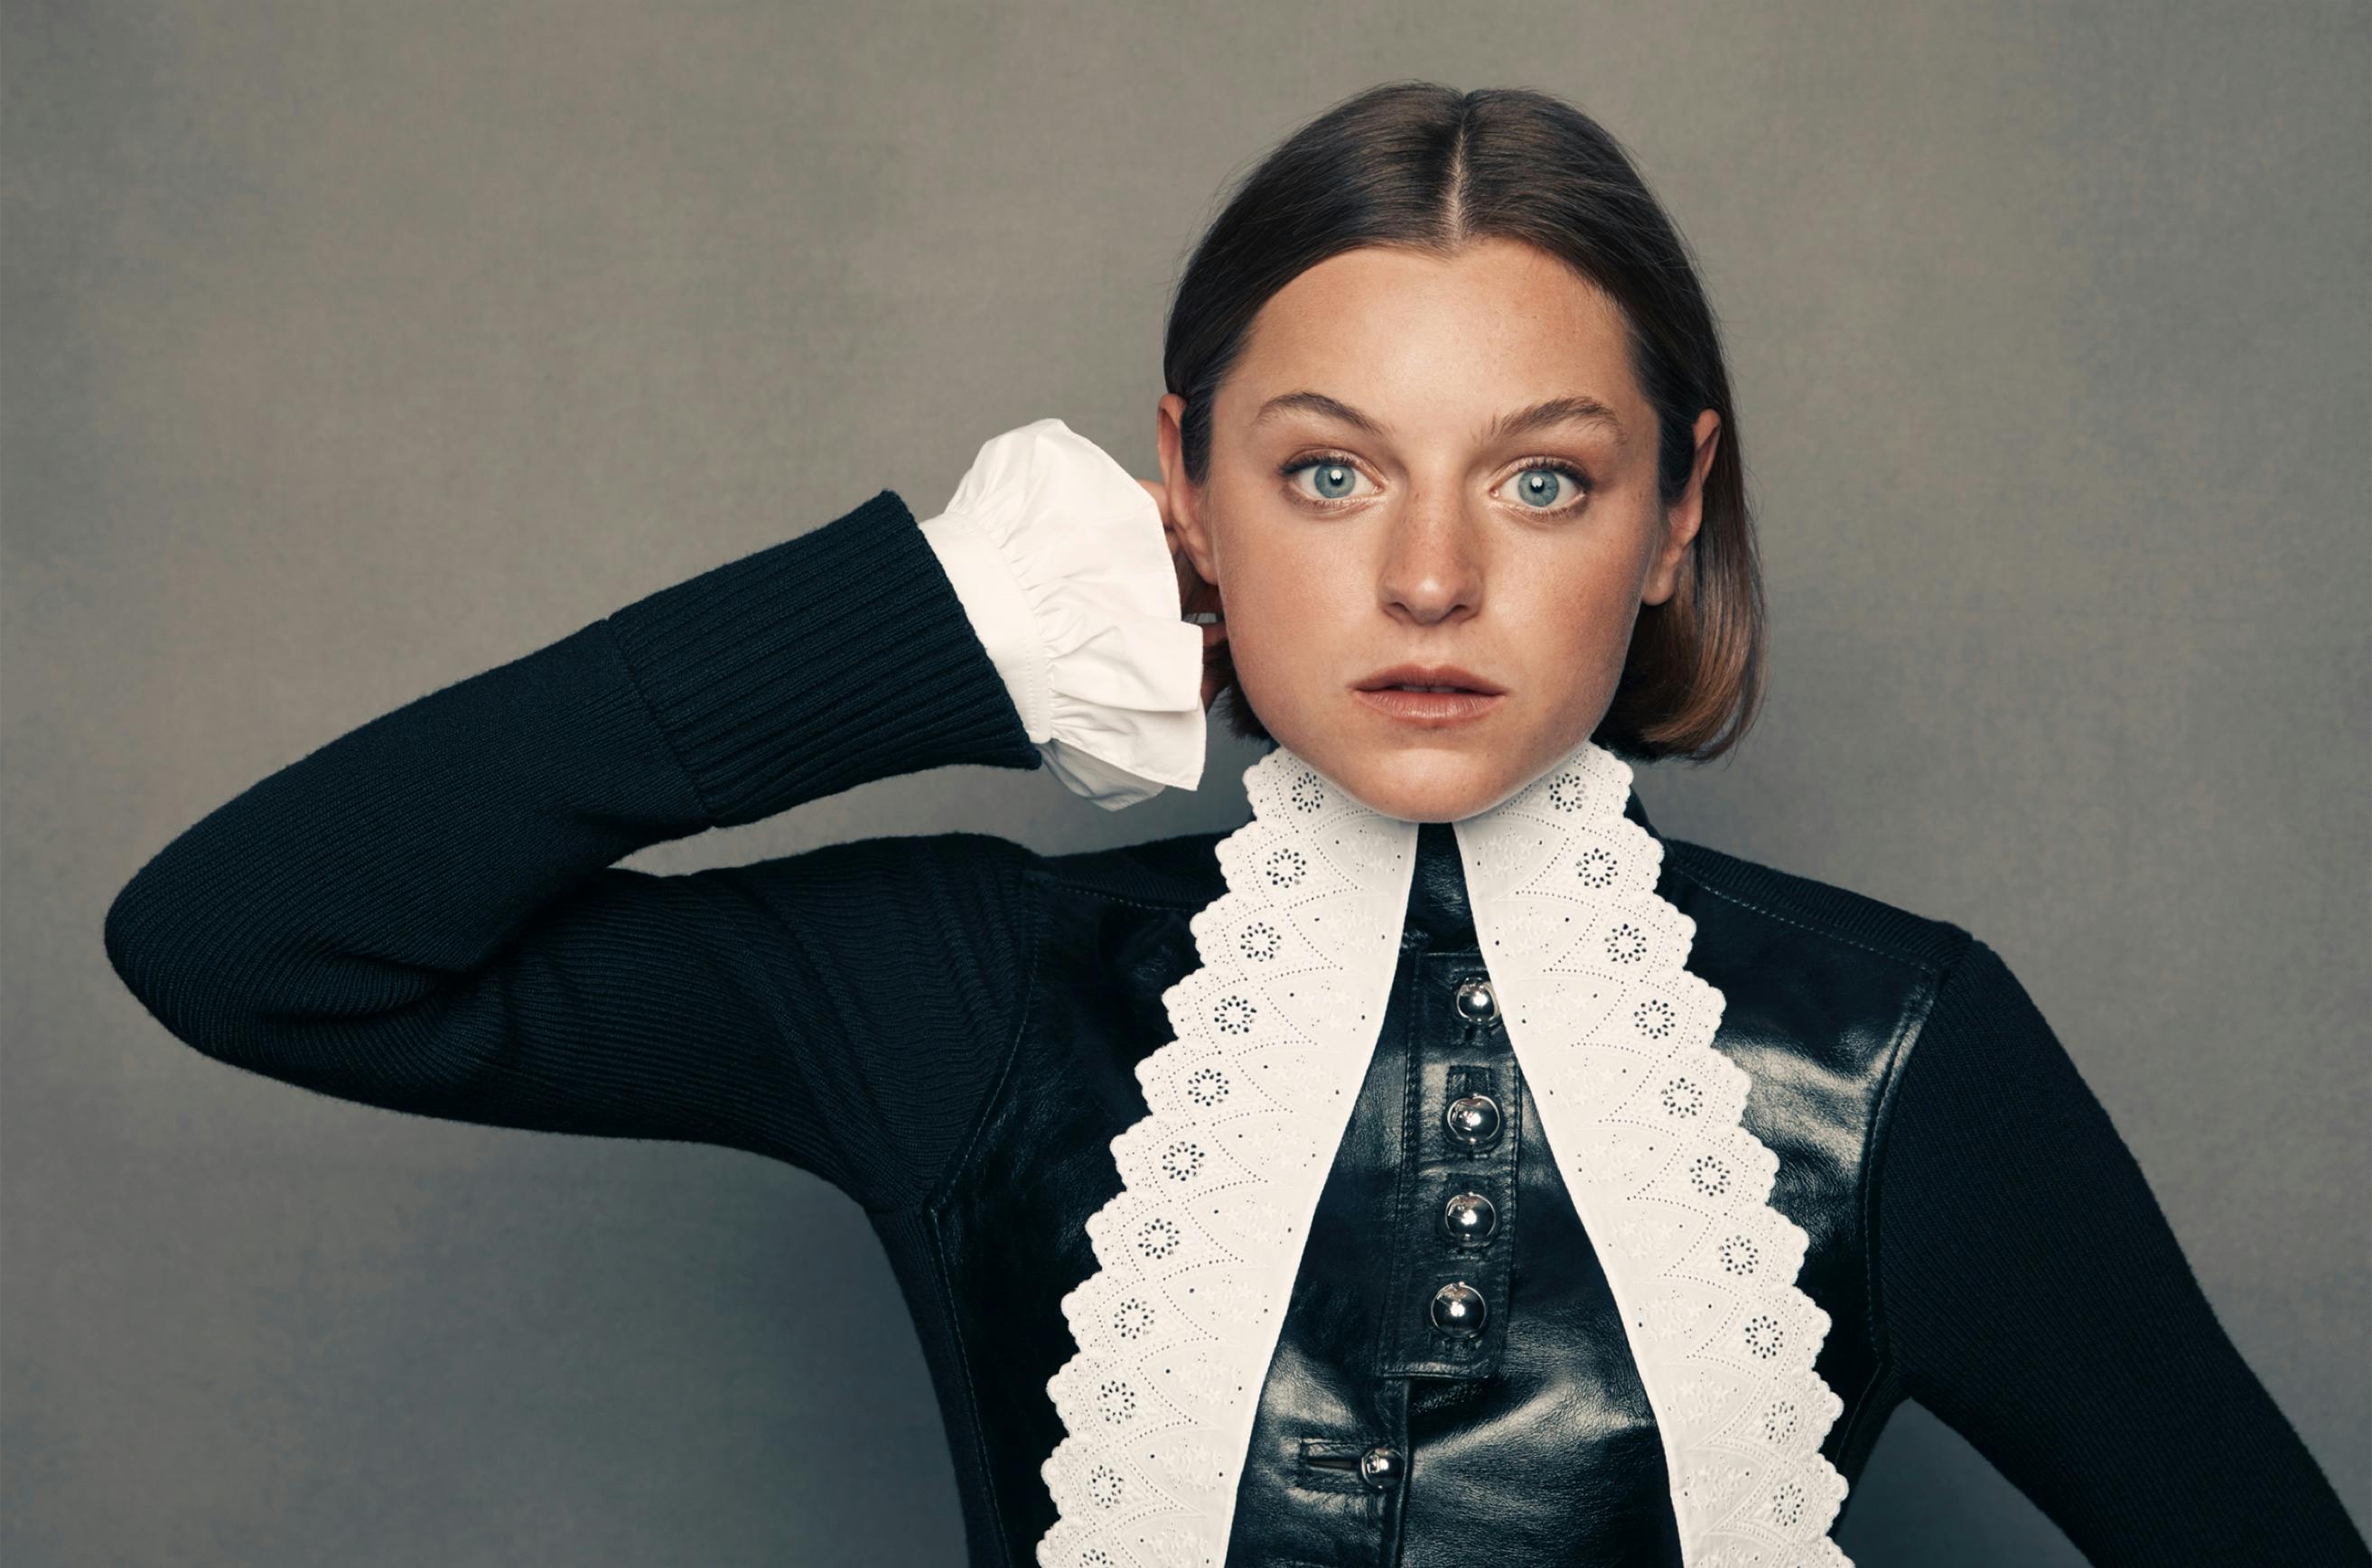 A portrait of Emma Corrin set against a slate-gray background. She wears a striking black leather and lace outfit with long sleeves and a high neckline. She has short cropped brown hair and her blue eyes pierce through the shot.